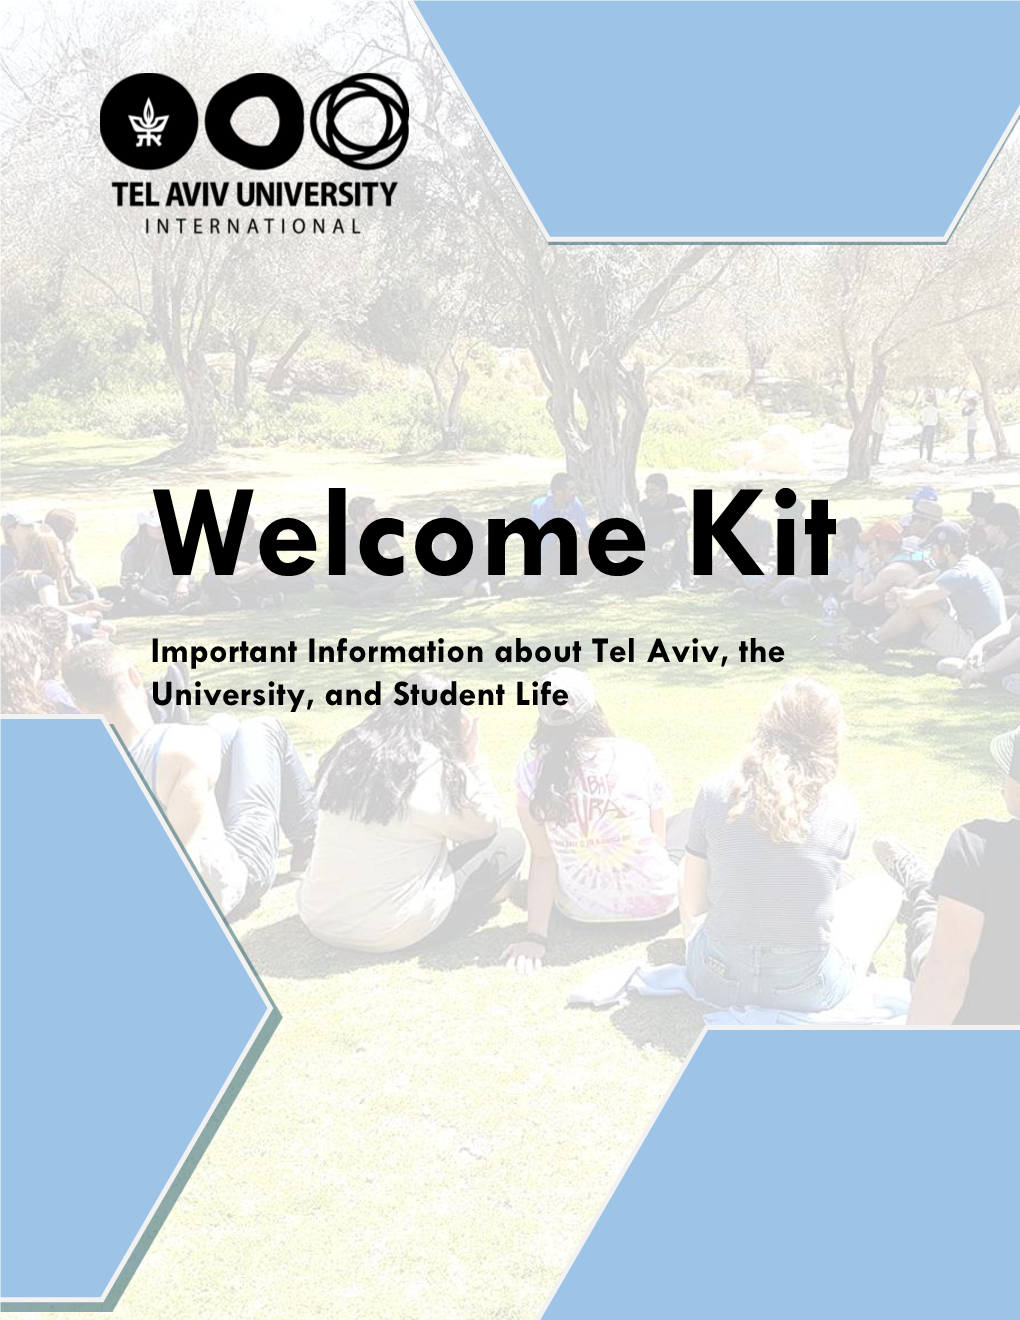 Important Information About Tel Aviv, the University, and Student Life